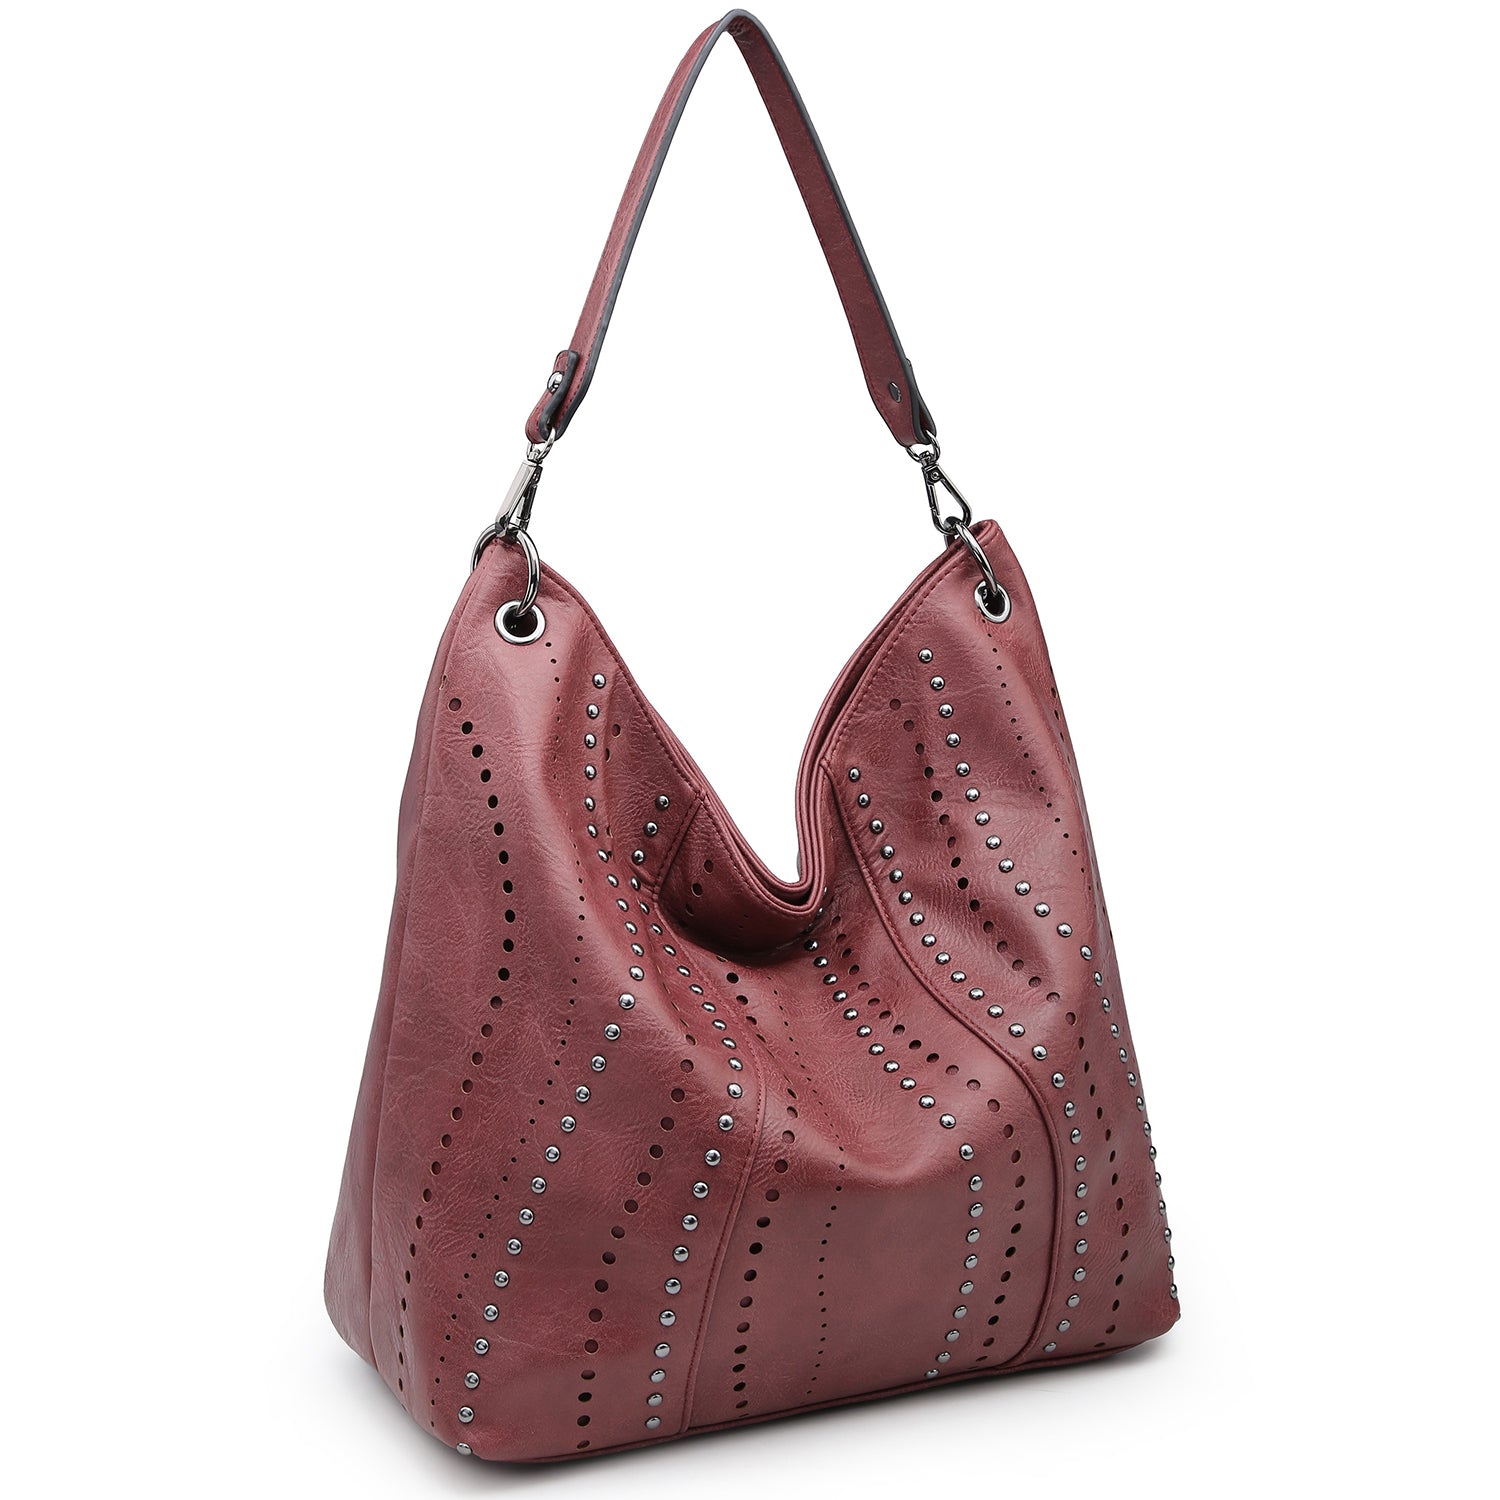 Buy ROUROU Glossy Patent Leather Handbag for Women Top Handle Tote Bag  Evening Shoulder Bag Wedding Satchel Retro Purse, Burgundy, Large at  Amazon.in